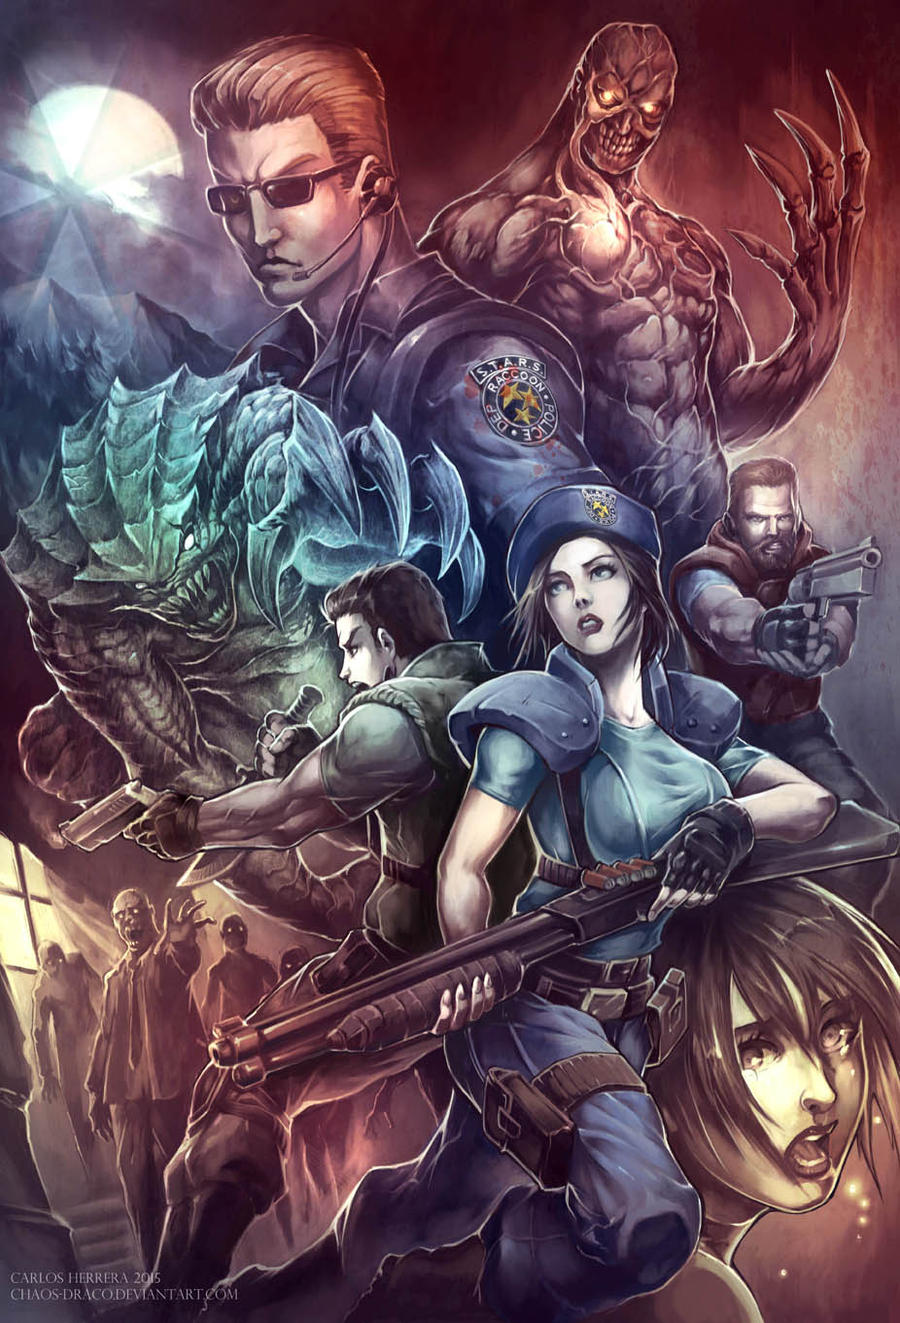 Biohazard the beginning by Chaos-Draco on DeviantArt